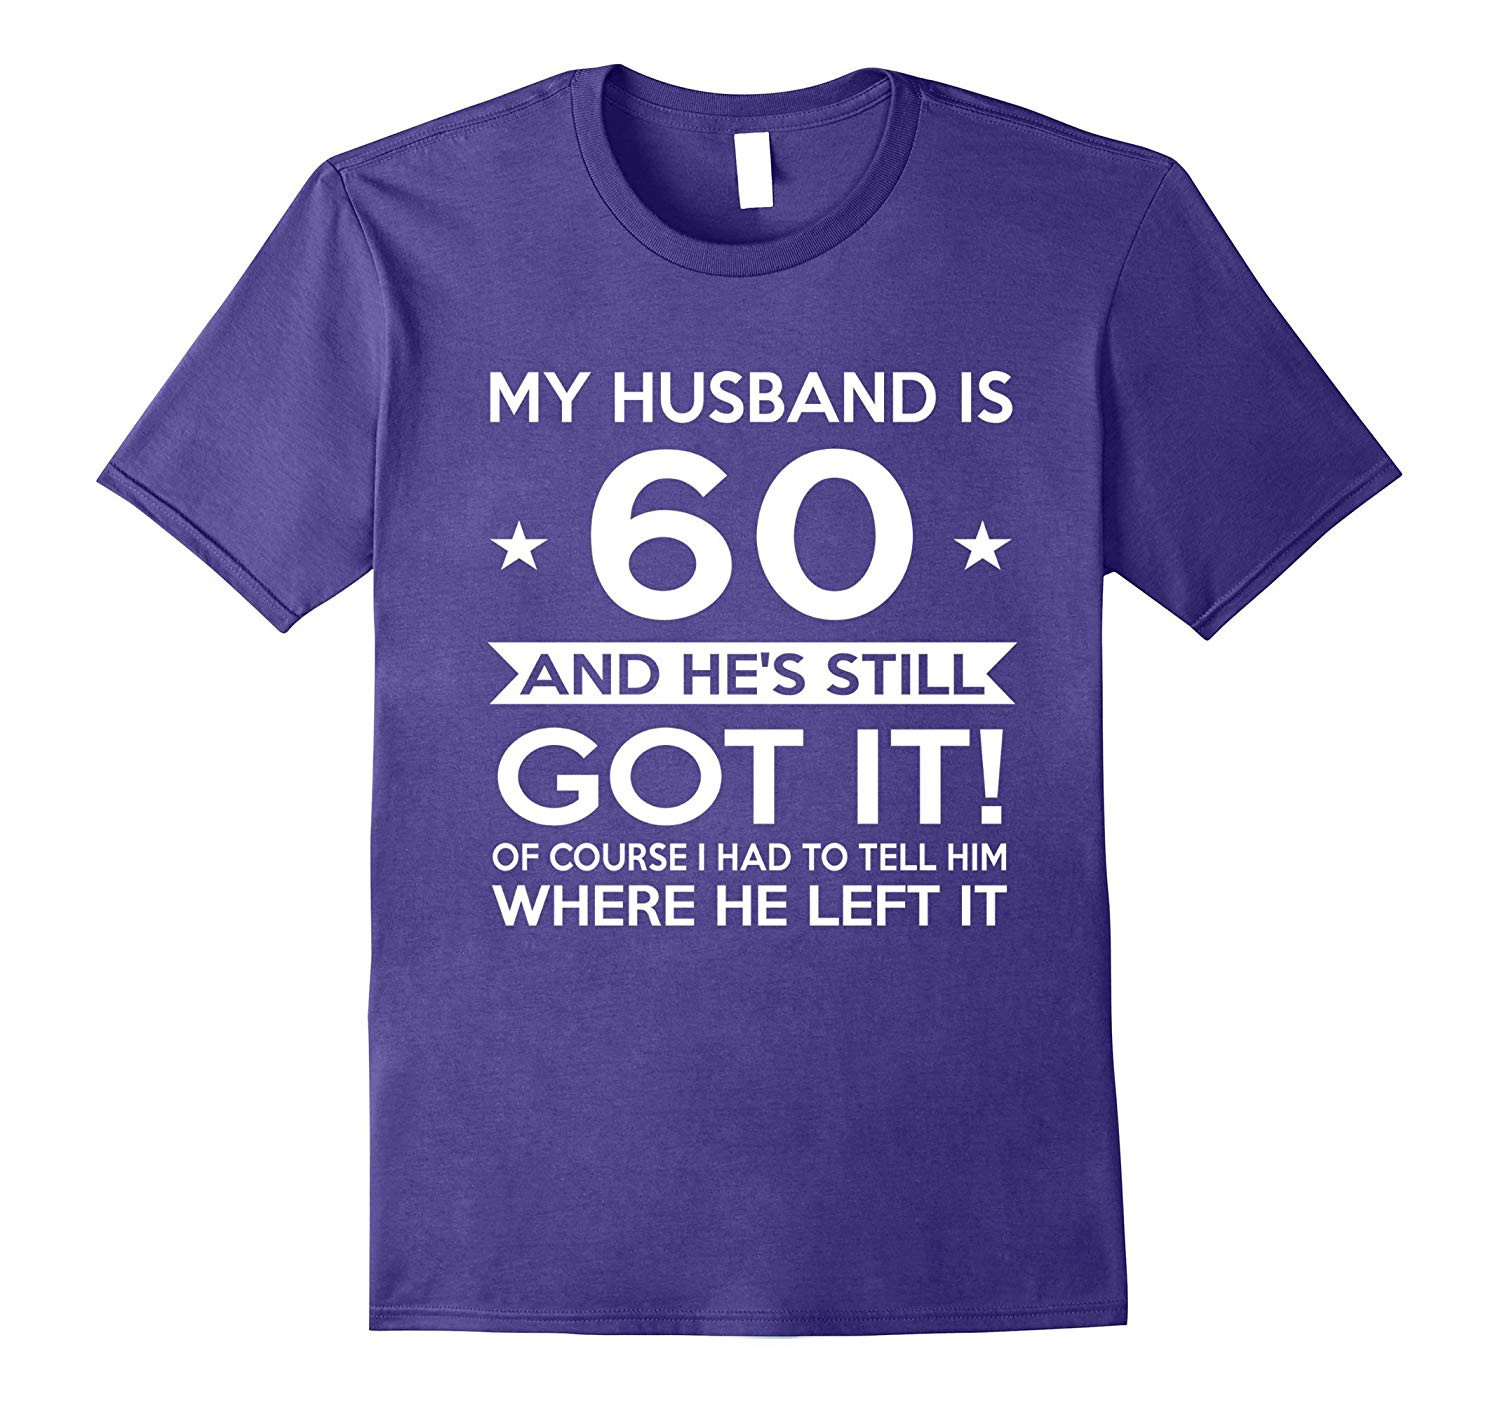 Husband Birthday Gift Ideas
 My Husband is 60 60th Birthday Gift Ideas for him CL